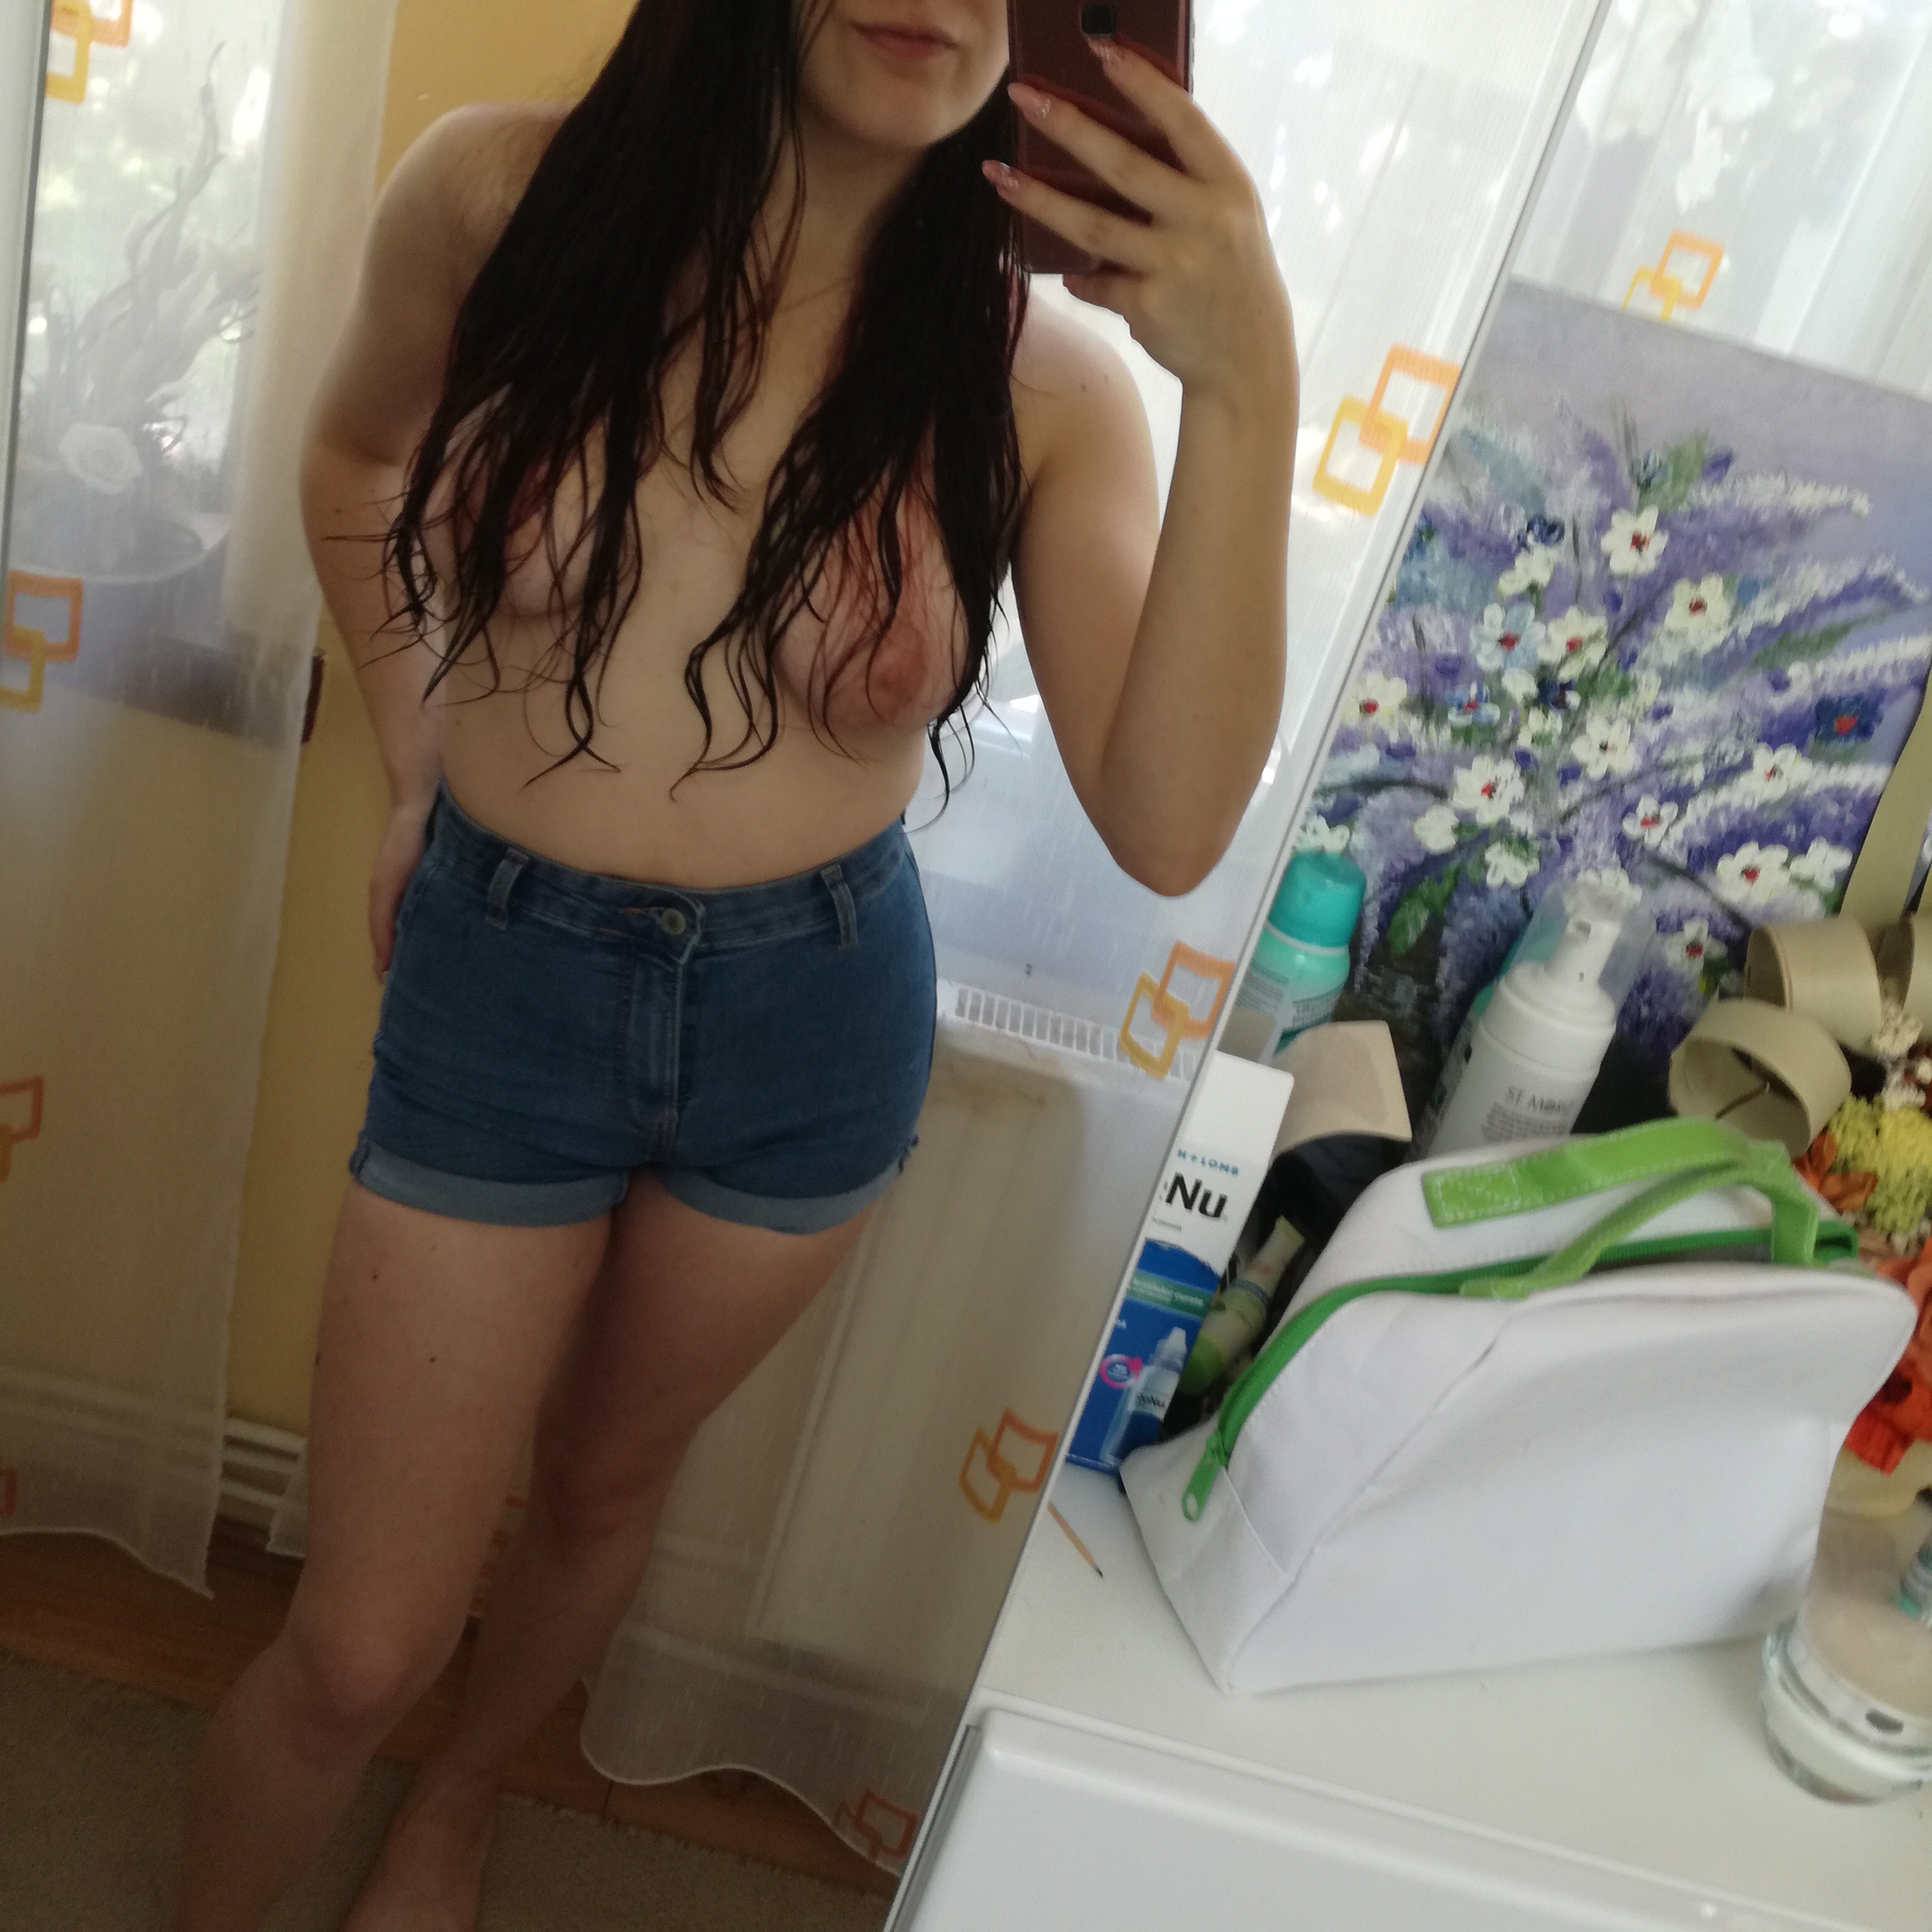 Just chilling in my short shorts. {F19}